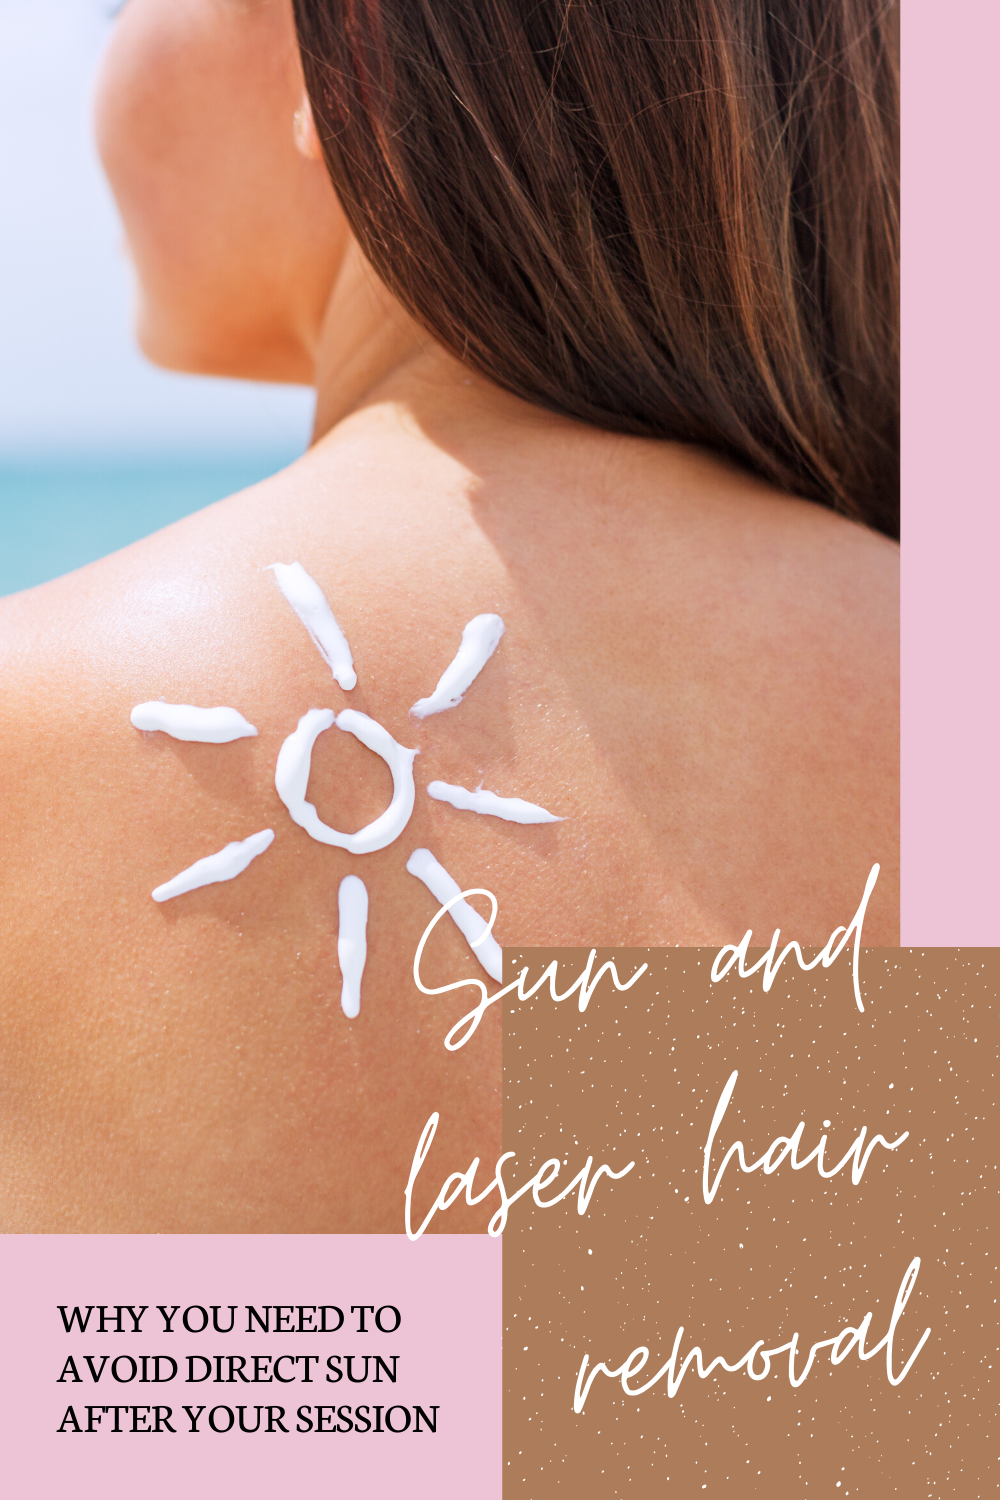 What happens if you go in the sun after laser hair removal